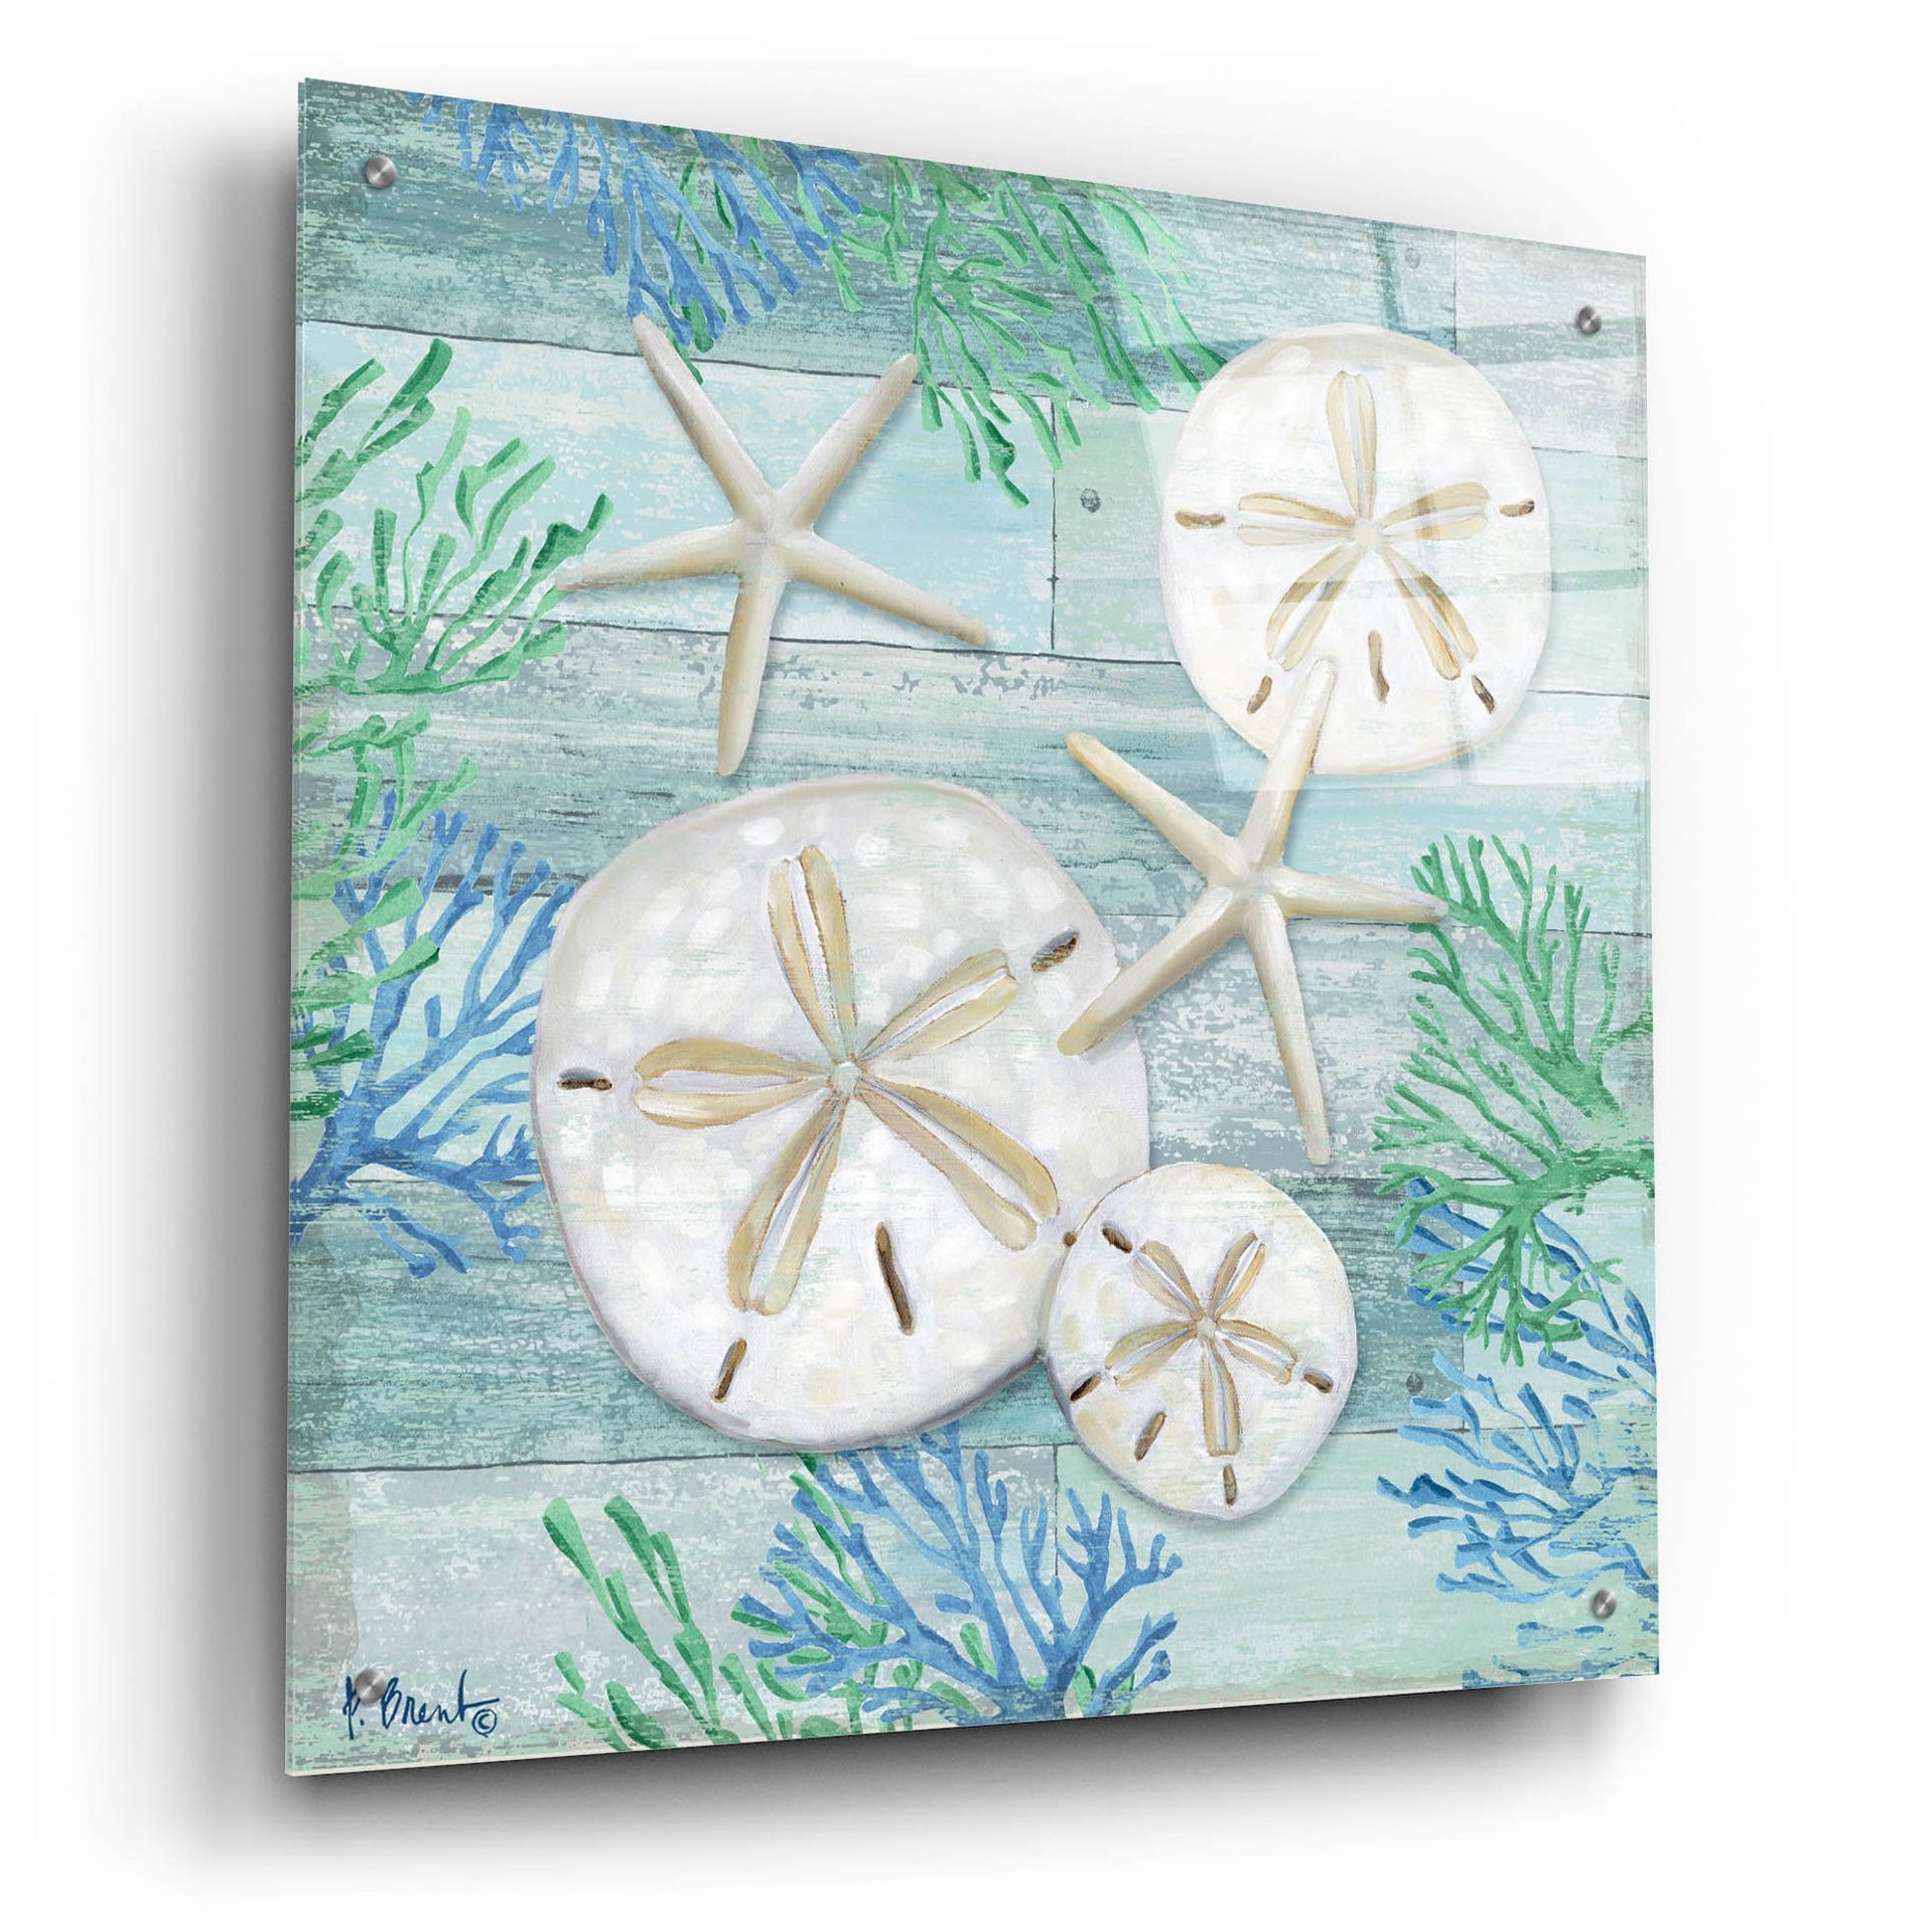 Epic Art 'Clearwater Shells I' by Paul Brent, Acrylic Glass Wall Art,24x24